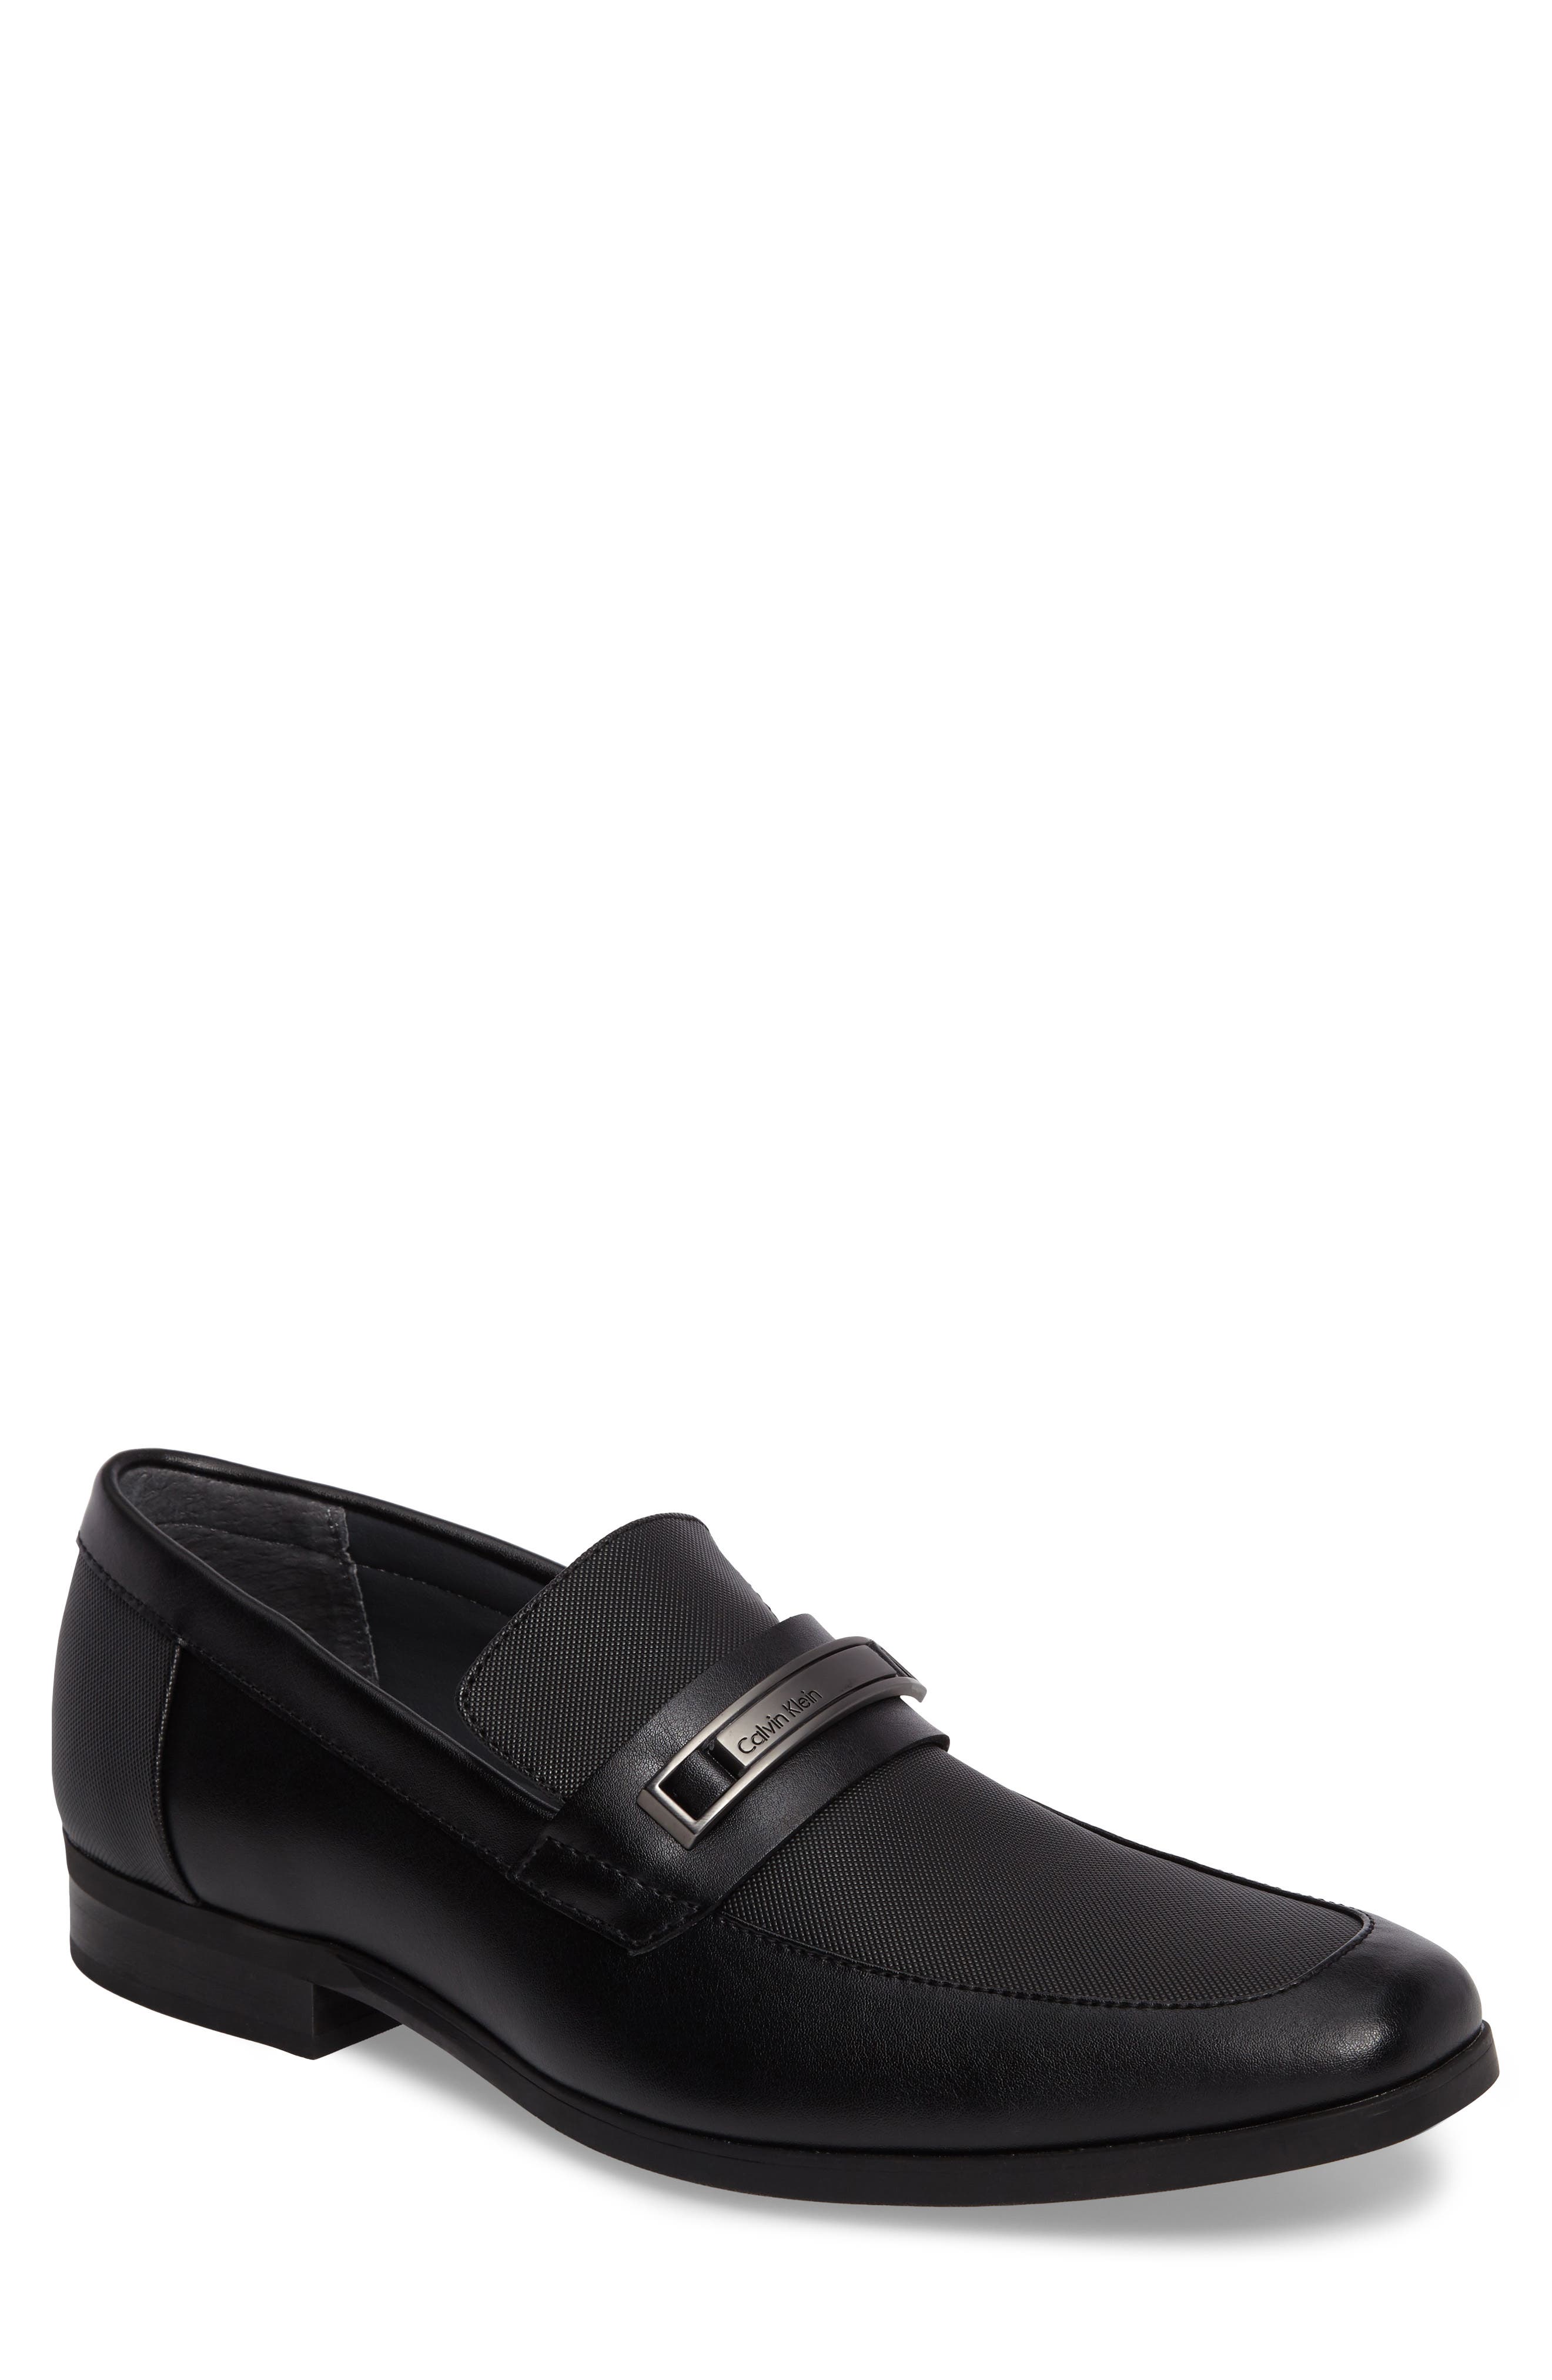 calvin klein shoes loafers